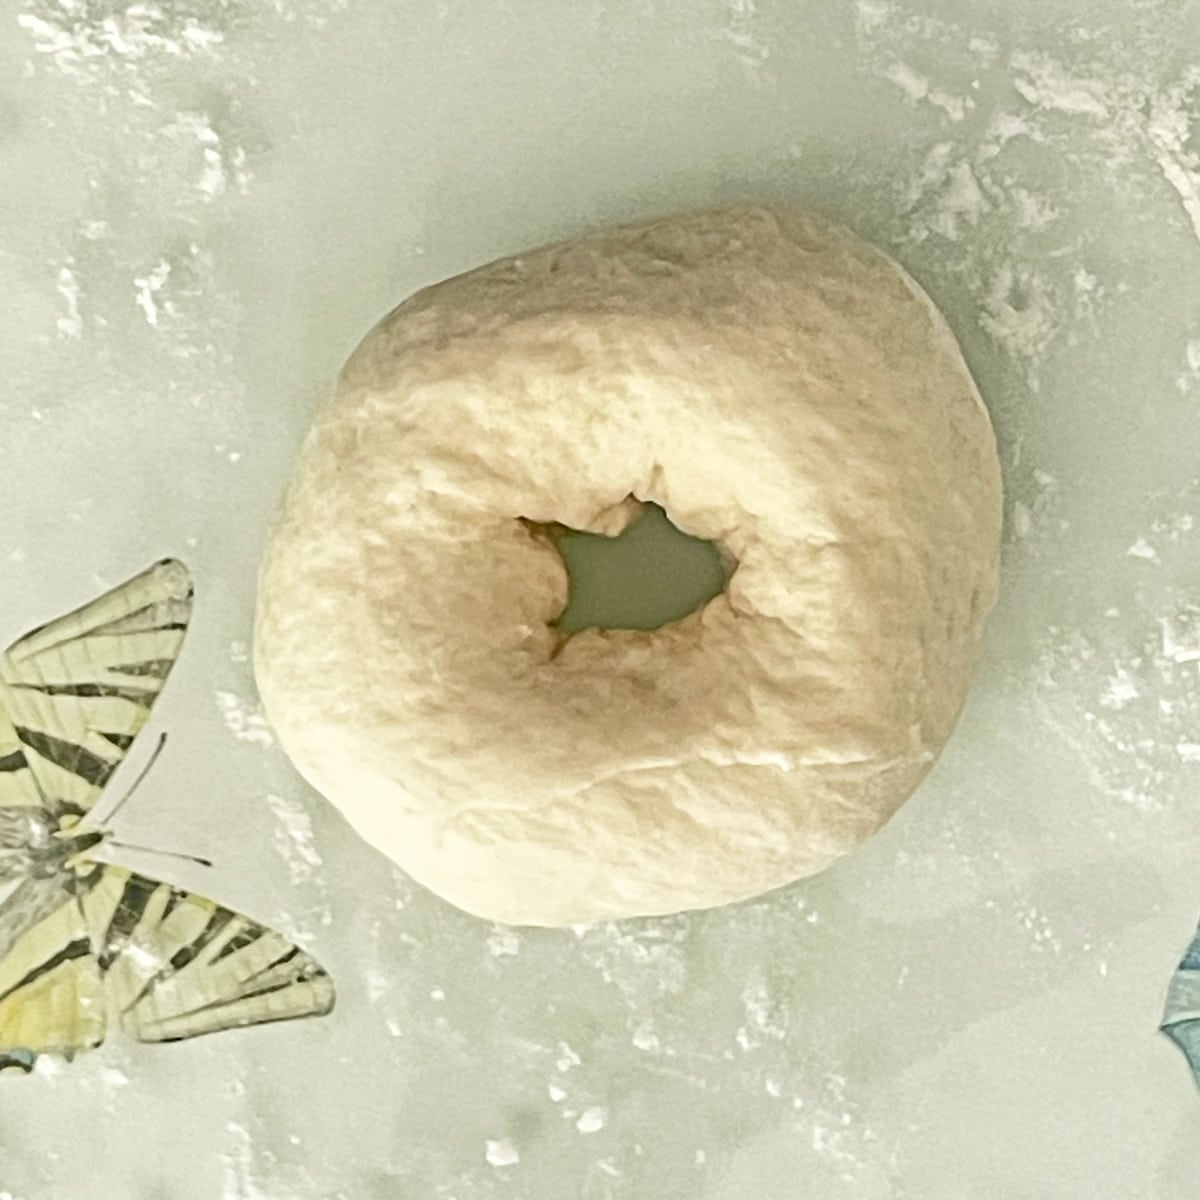 Bagels dough ball with a hole.